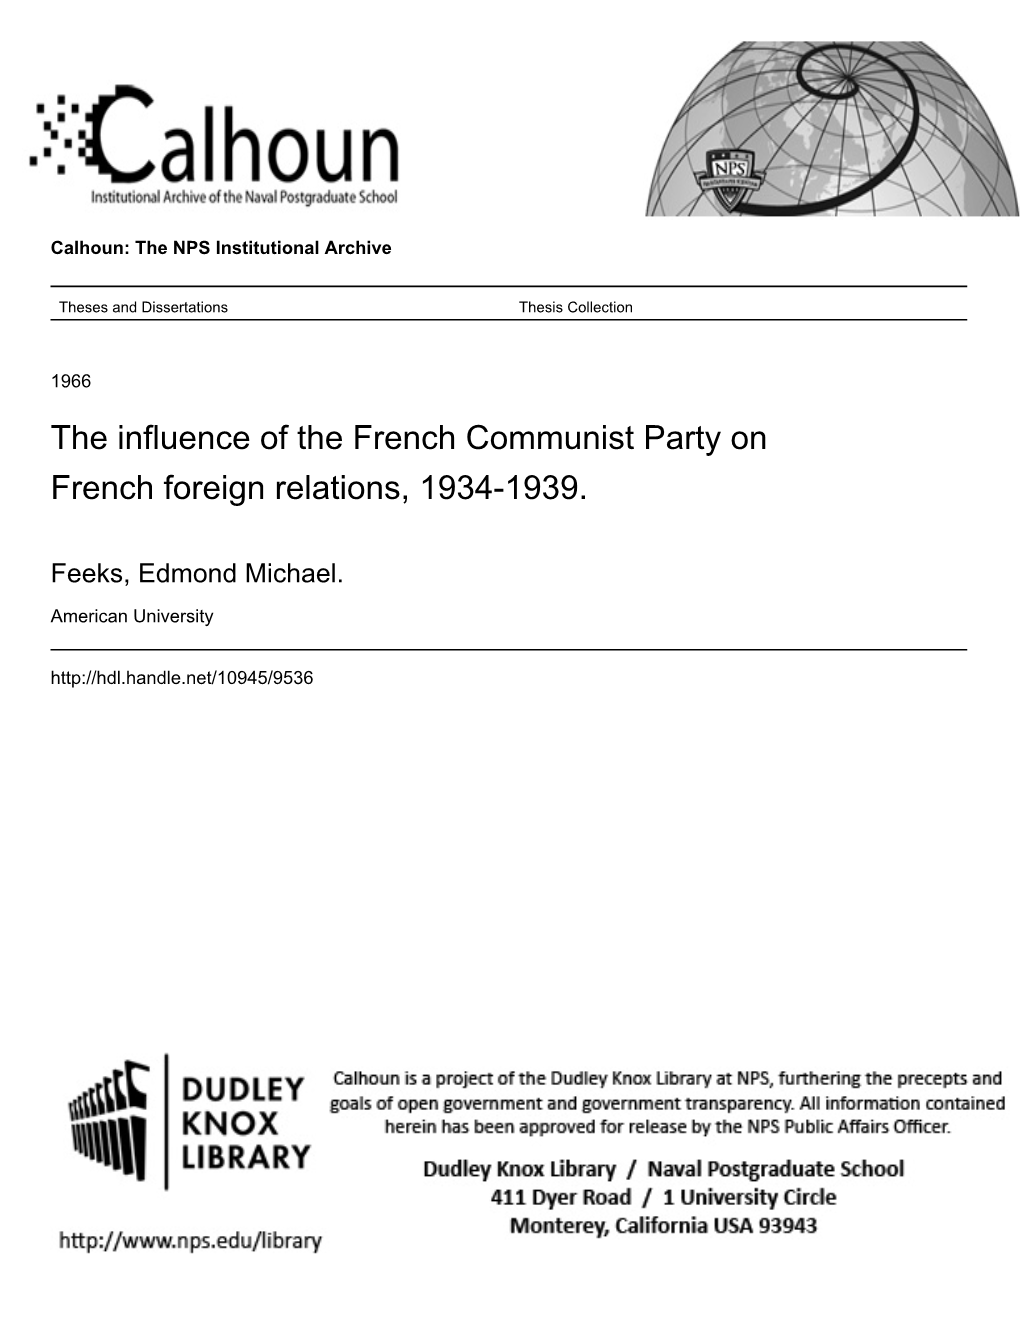 The Influence of the French Communist Party on French Foreign Relations, 1934-1939